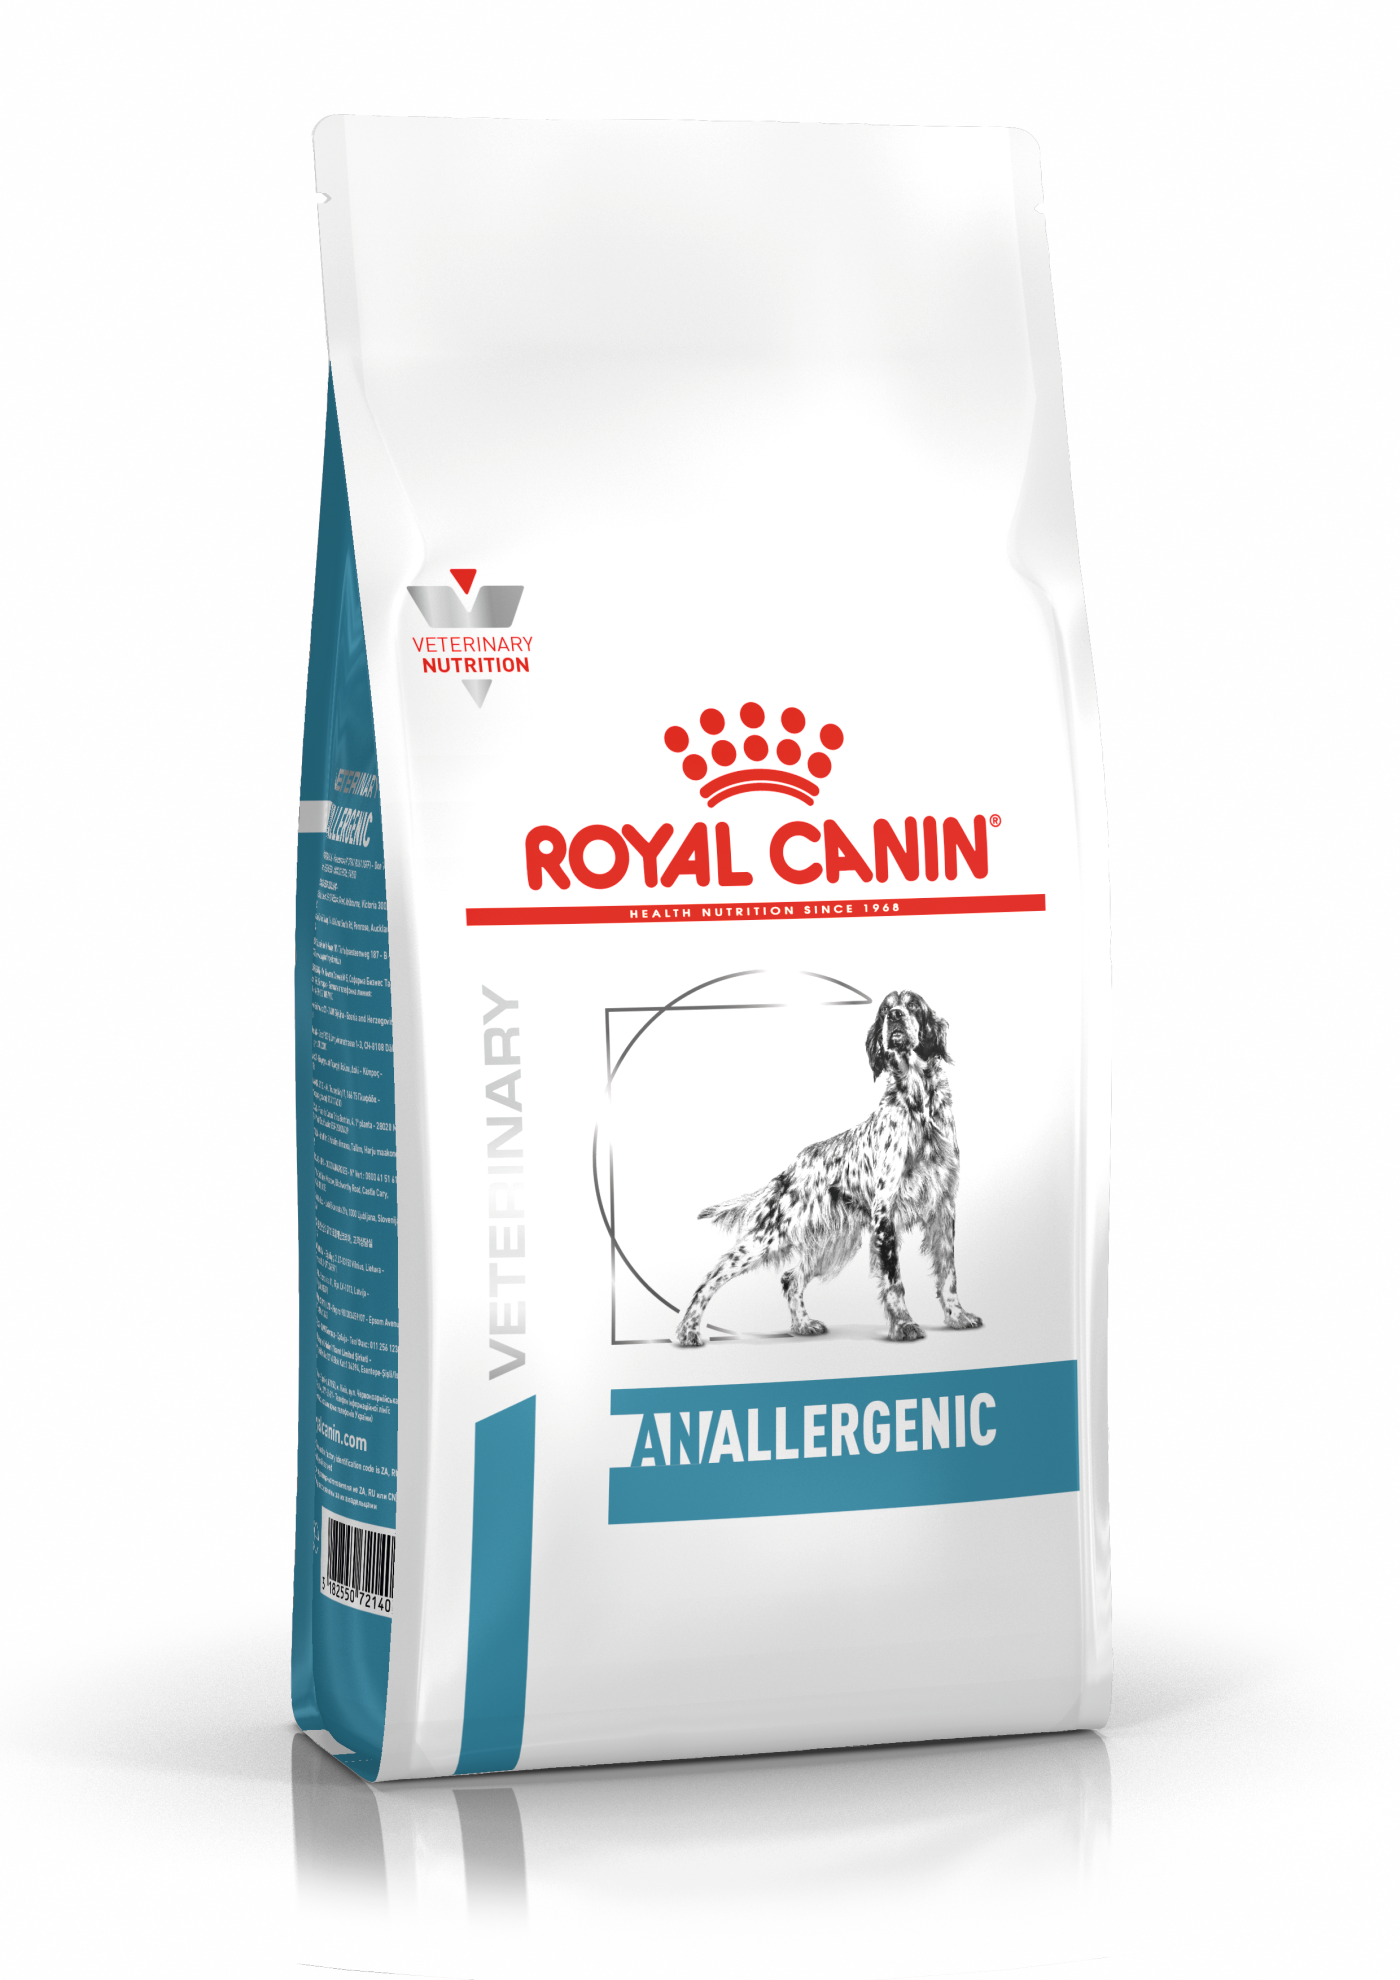 Royal Canin Anallergenic hond 1 x 3 kg